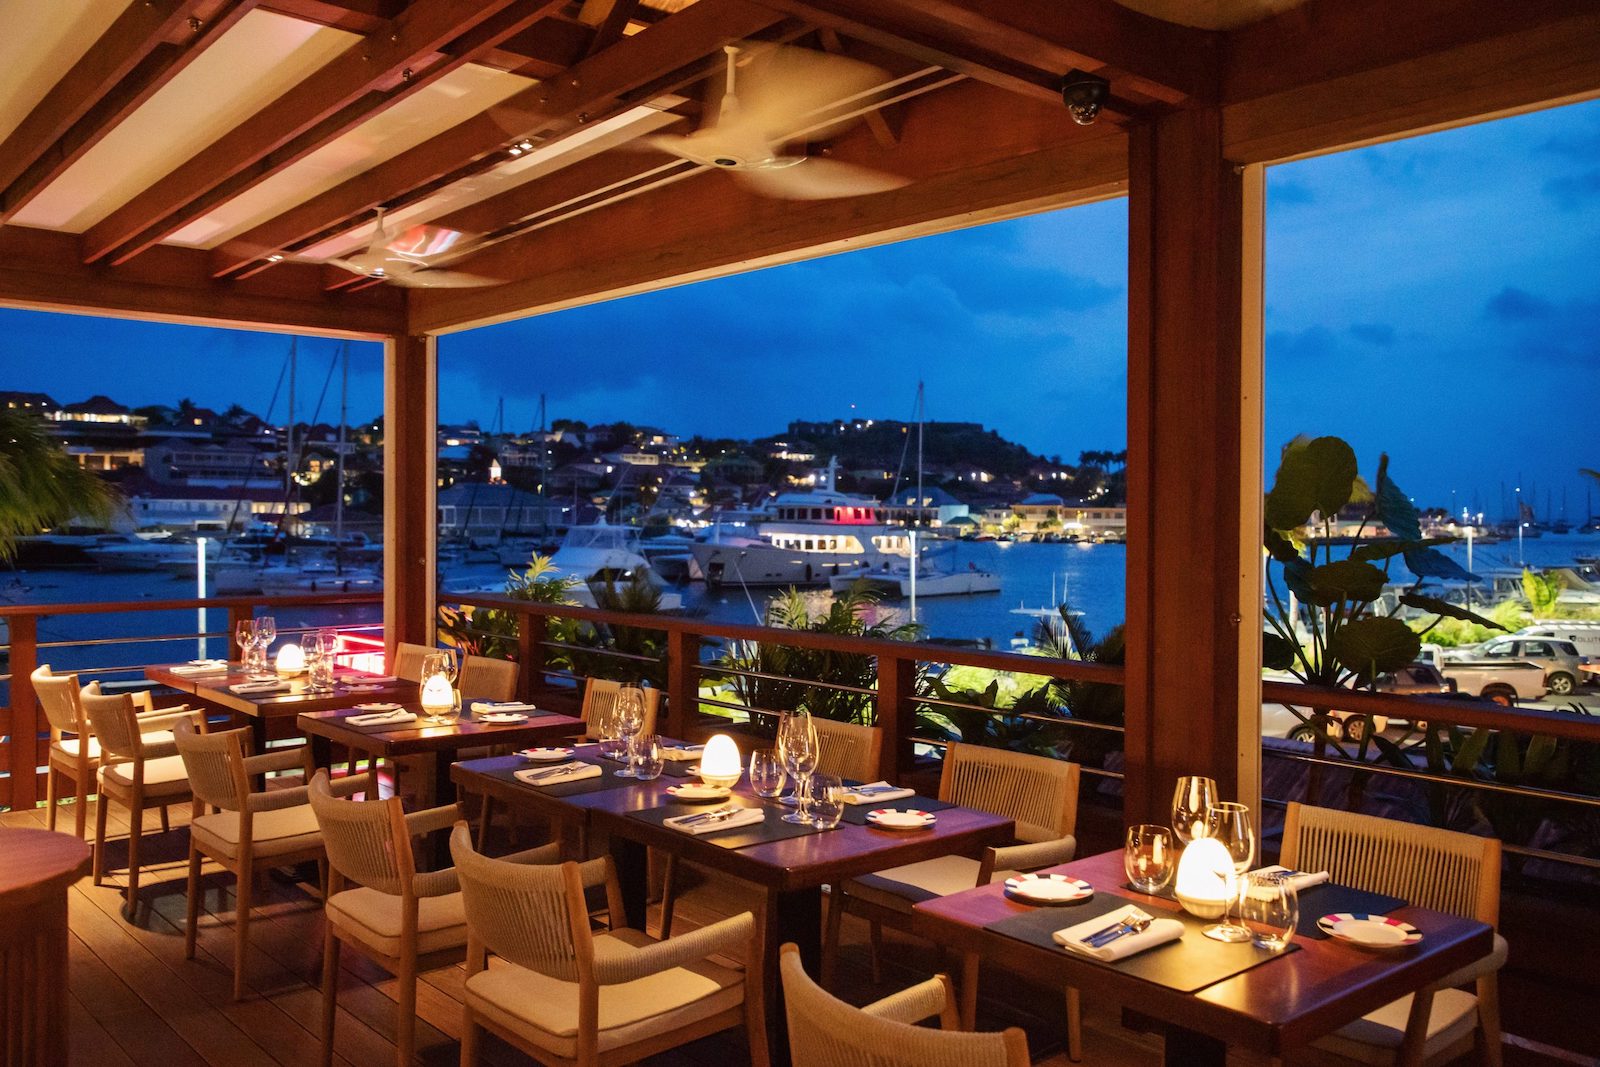 An insider's guide to St Barth's